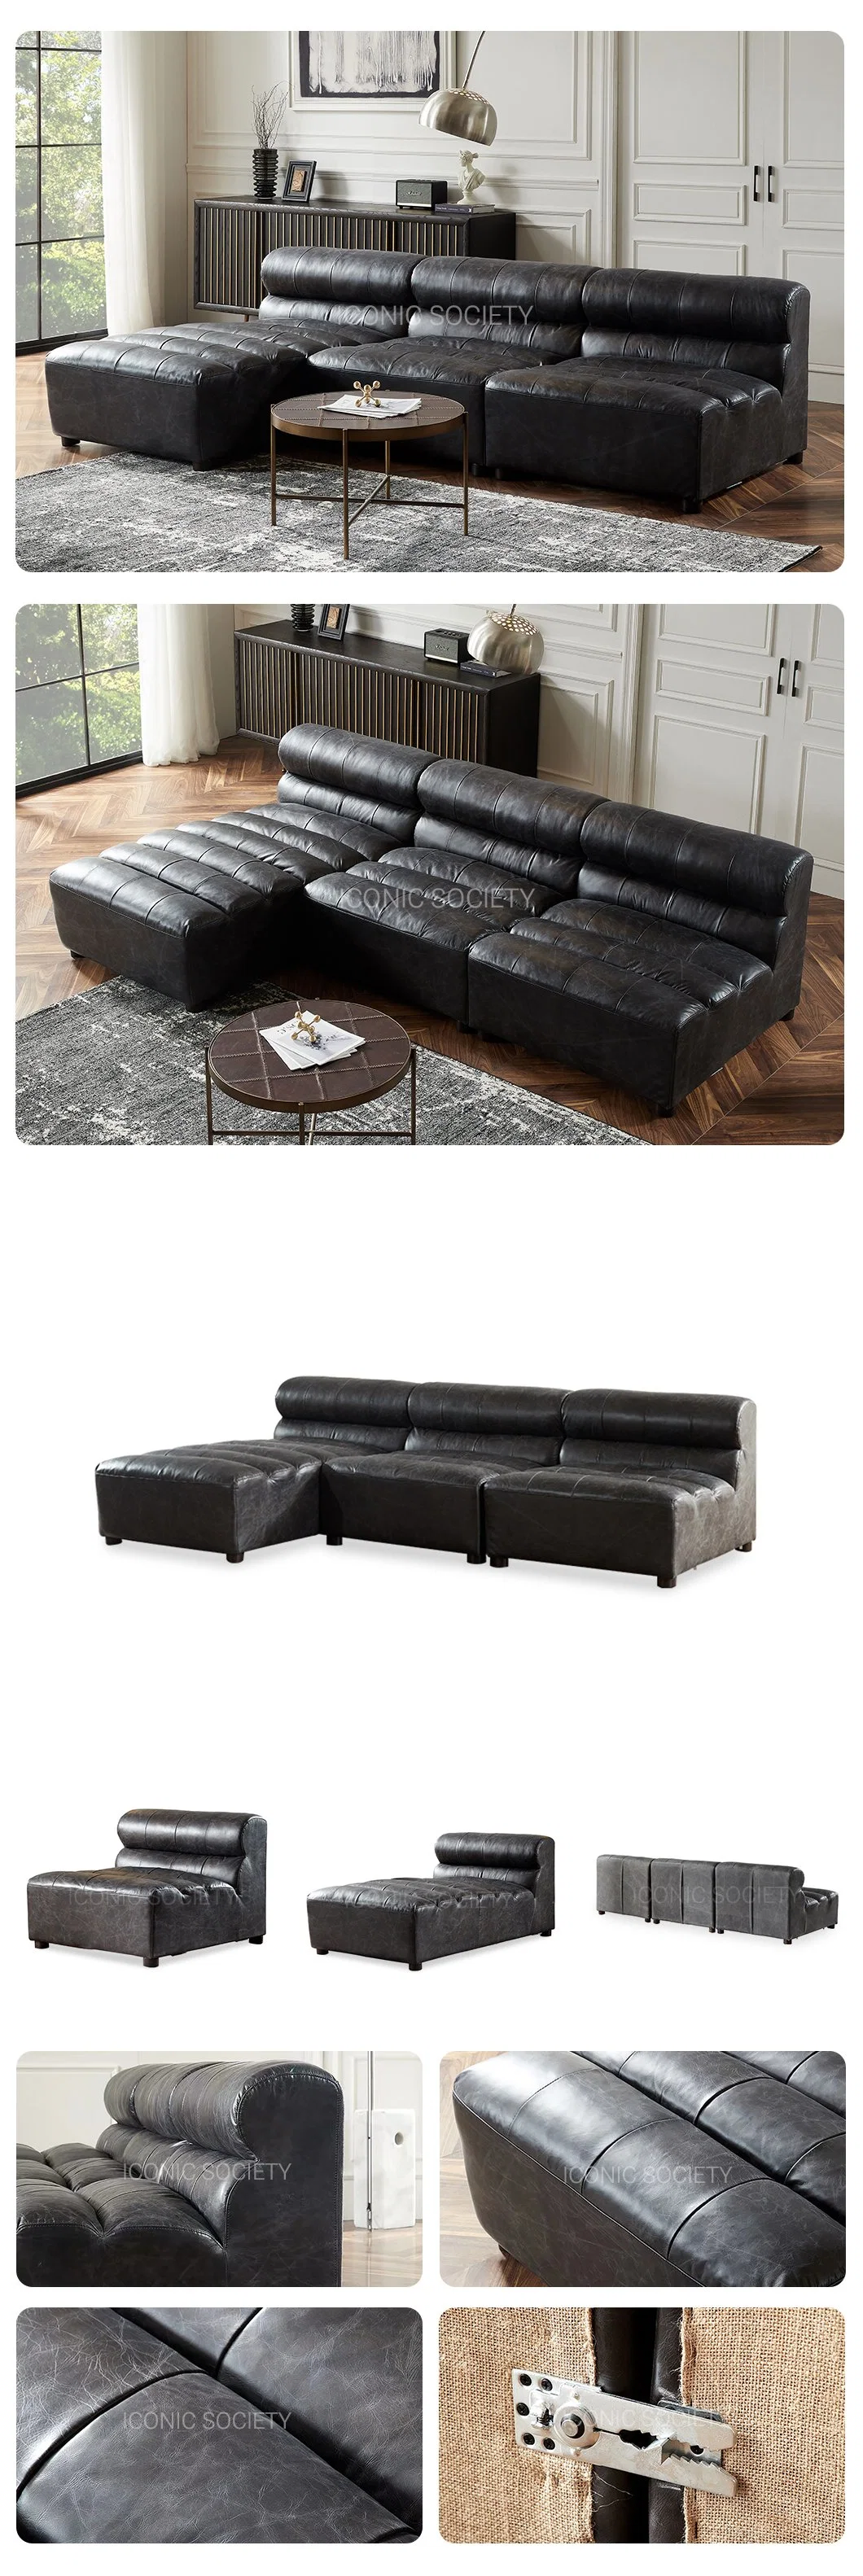 Sectional Modern Living Room Sitting Room Furniture Office Hotel Solid Motion Modular Genuine Leather Sofa Set